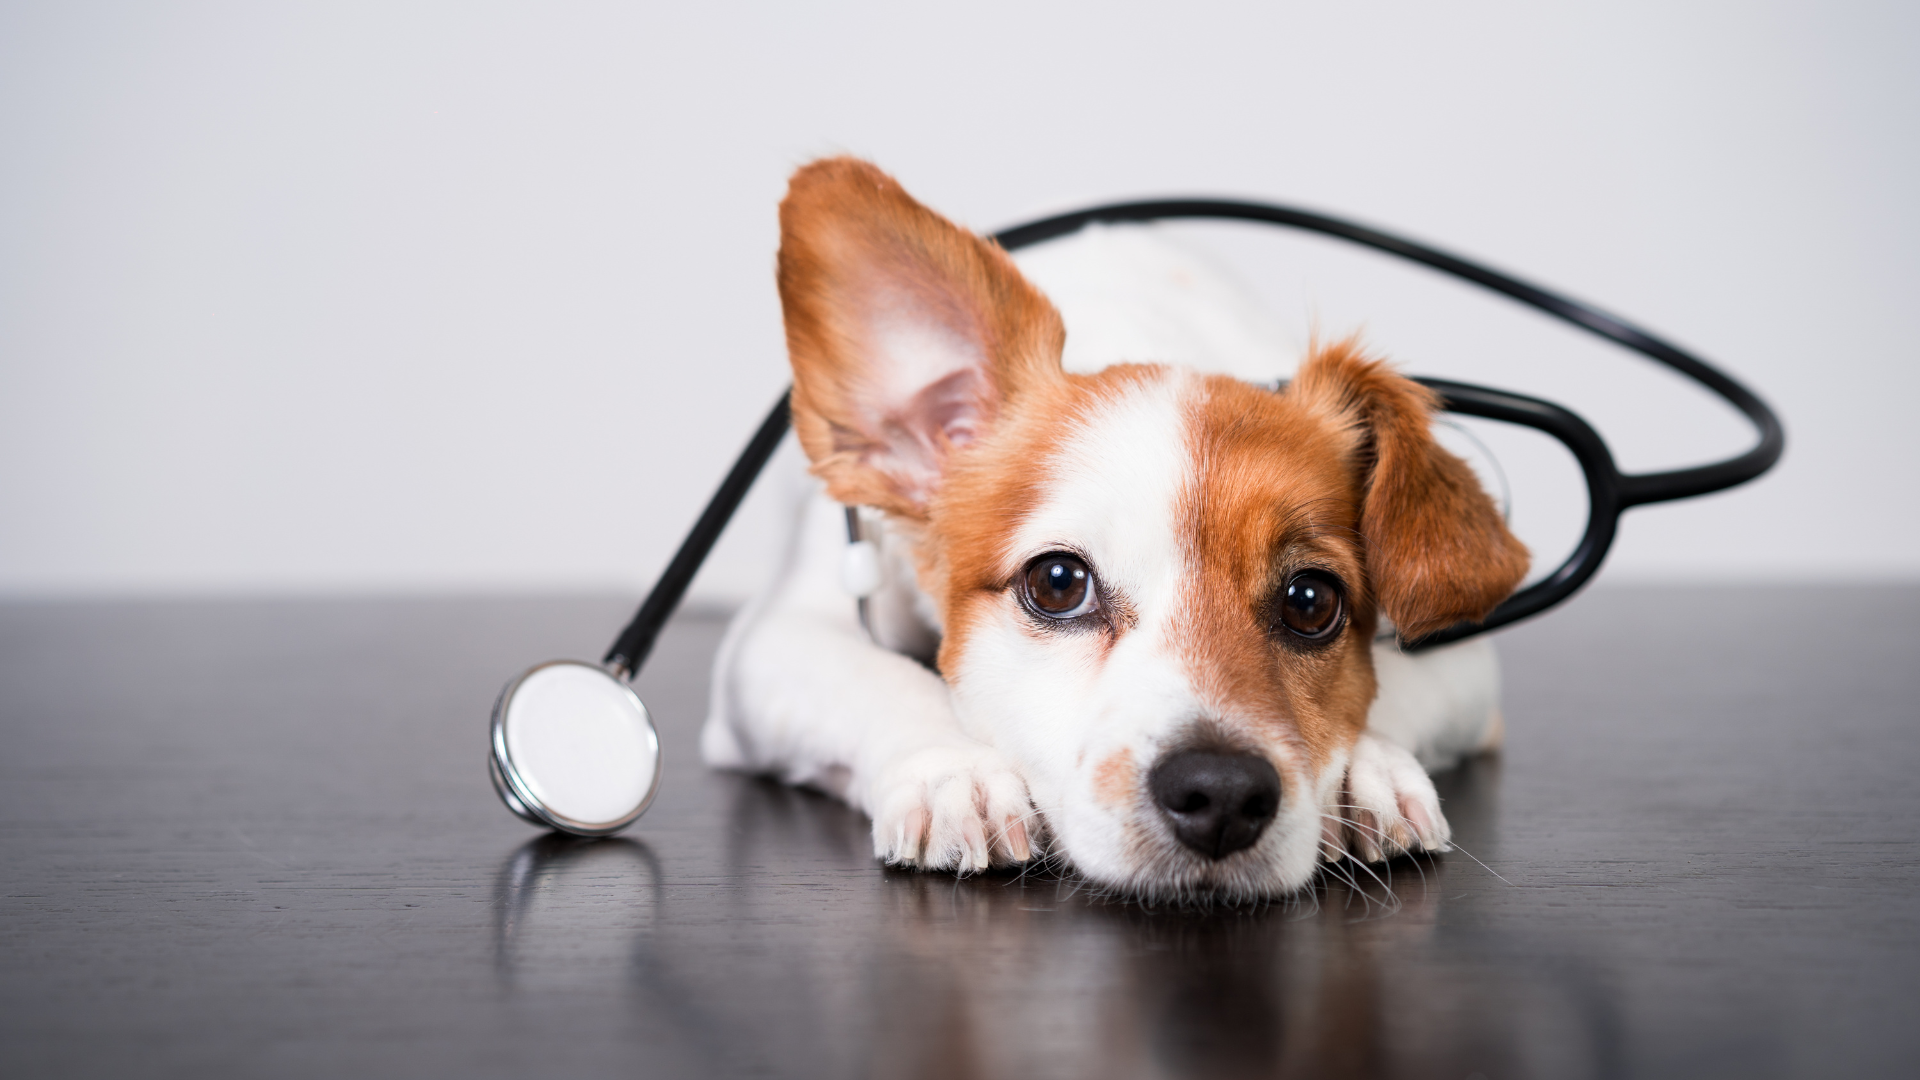 The benefits of cloud-based veterinary software in practice: All the pros of a server without the cons!